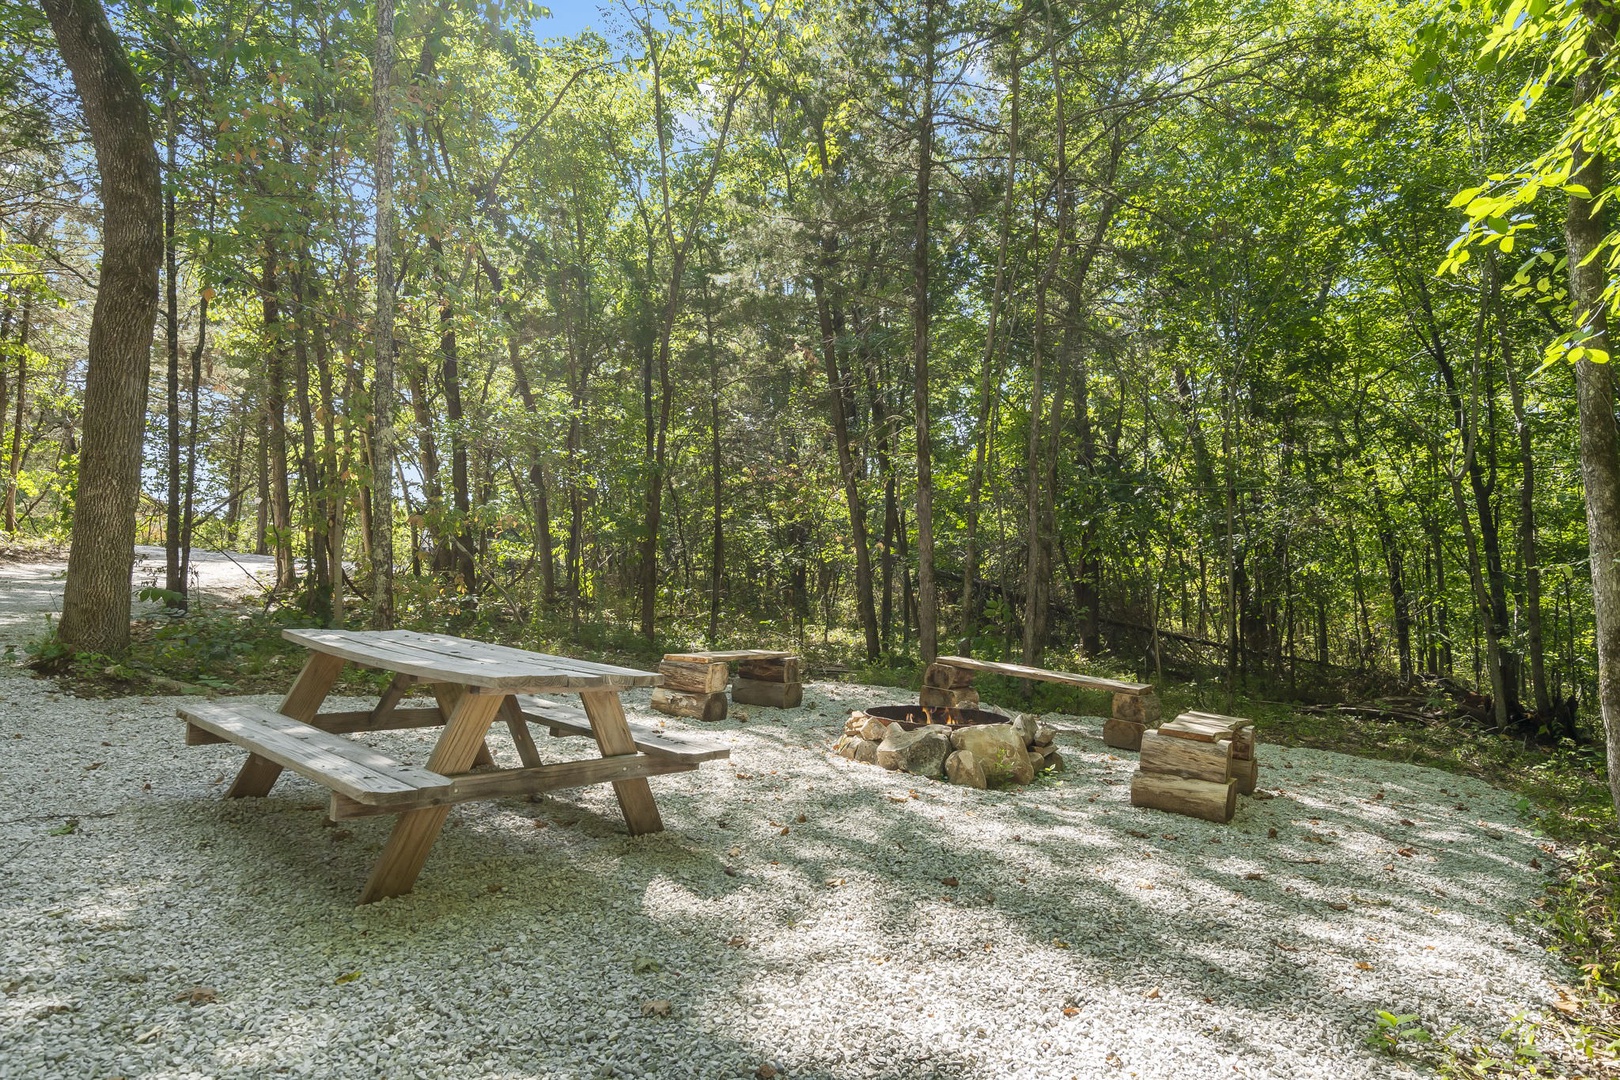 Private fire pit area for you and your guests to enjoy